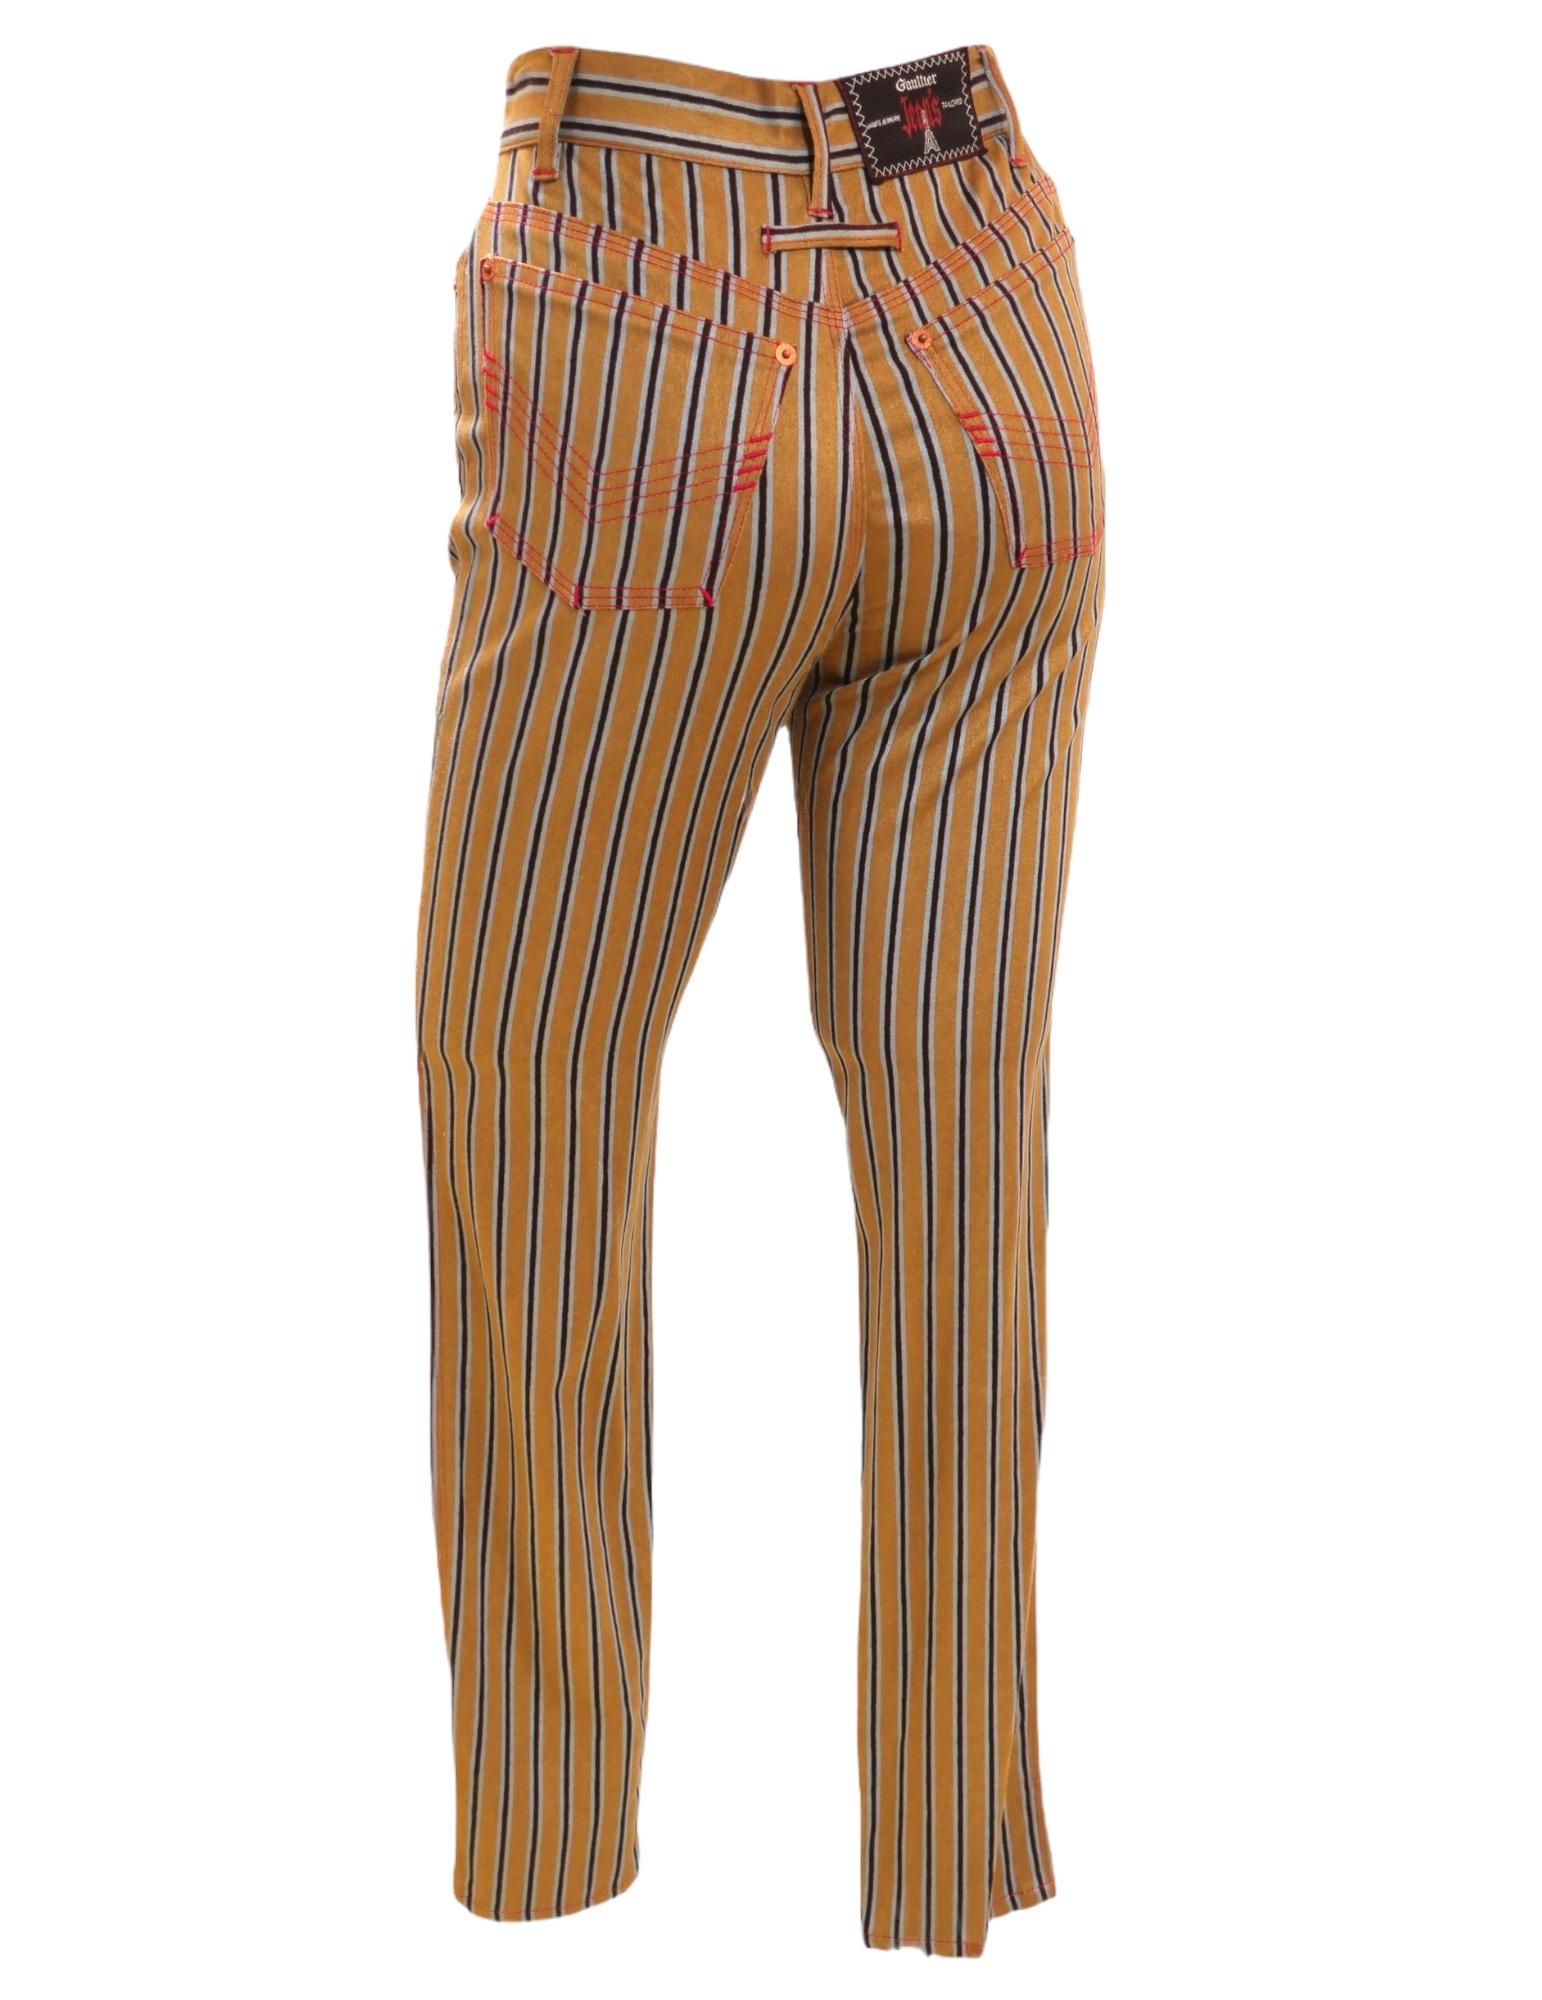 brown striped jeans